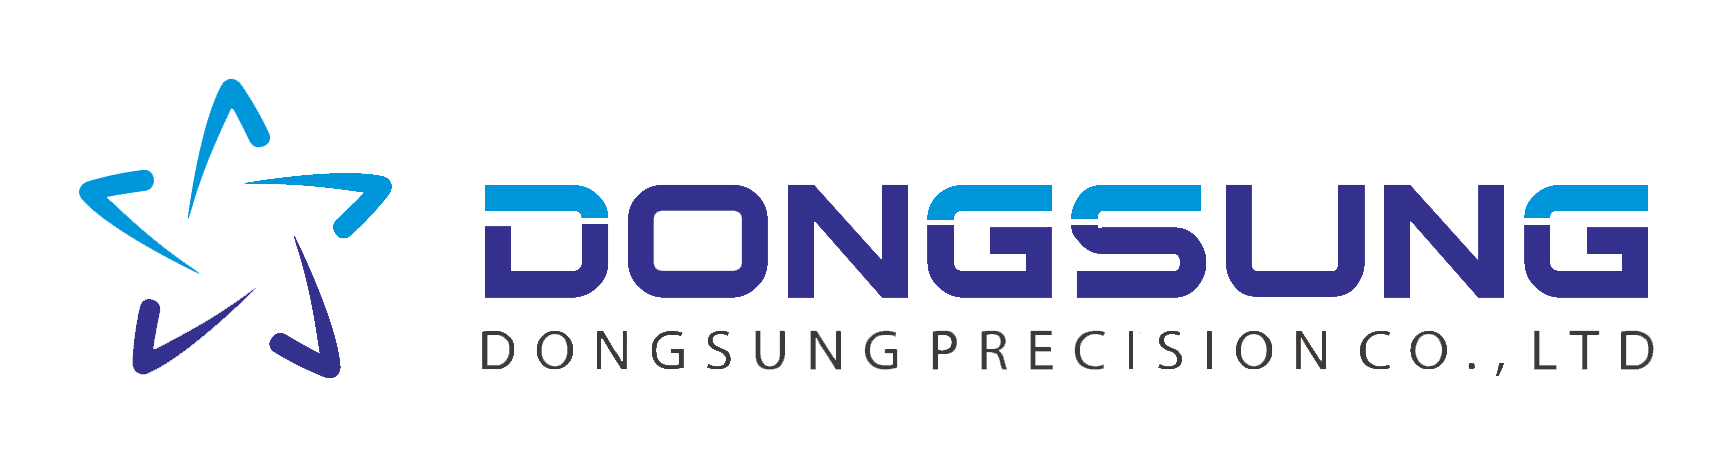 DONG SUNG PRECISION CO., LTD